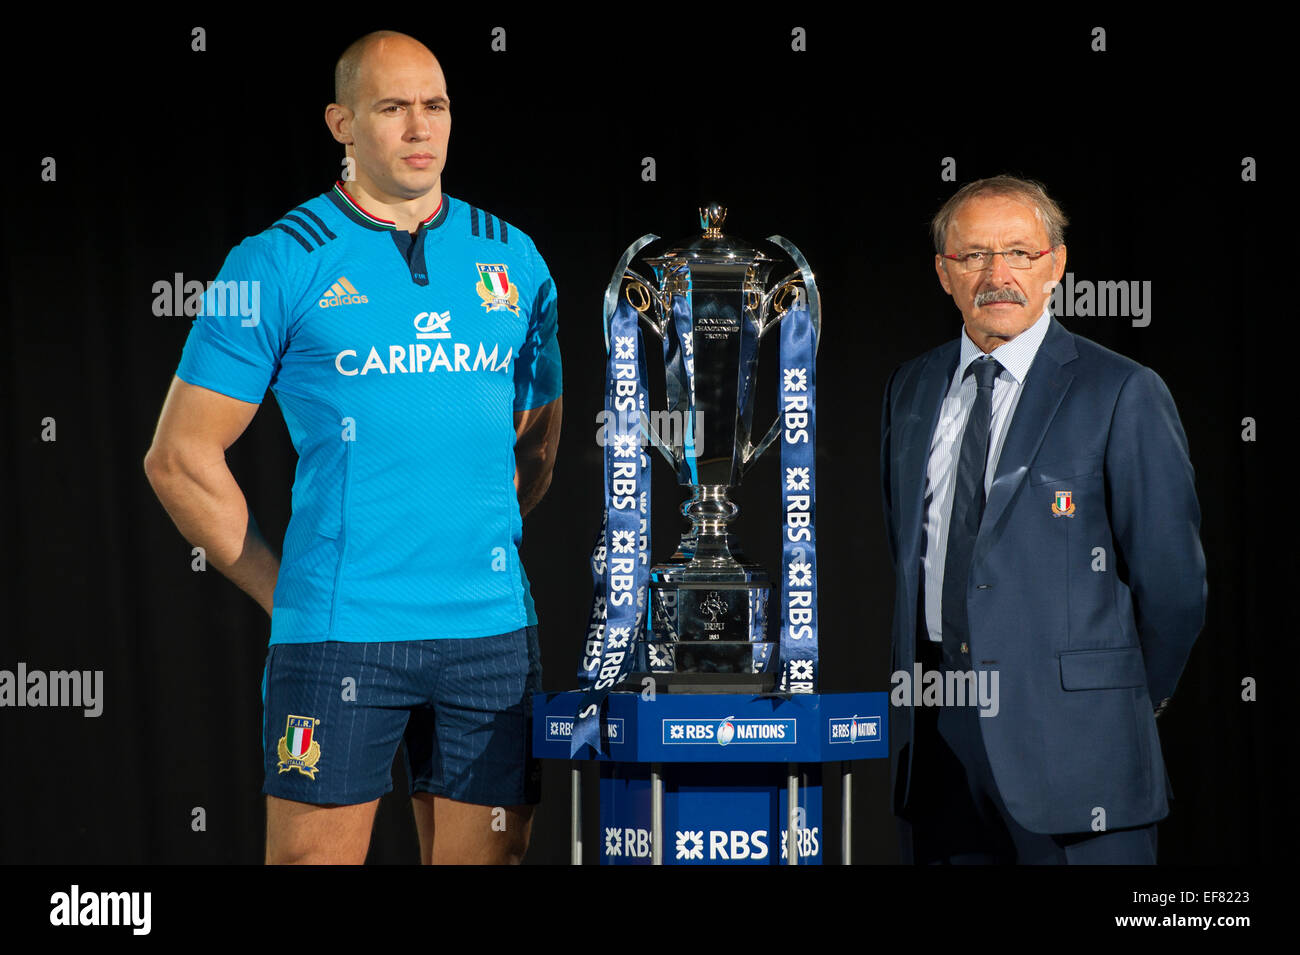 Sergio Parisse High Resolution Stock Photography and Images - Alamy